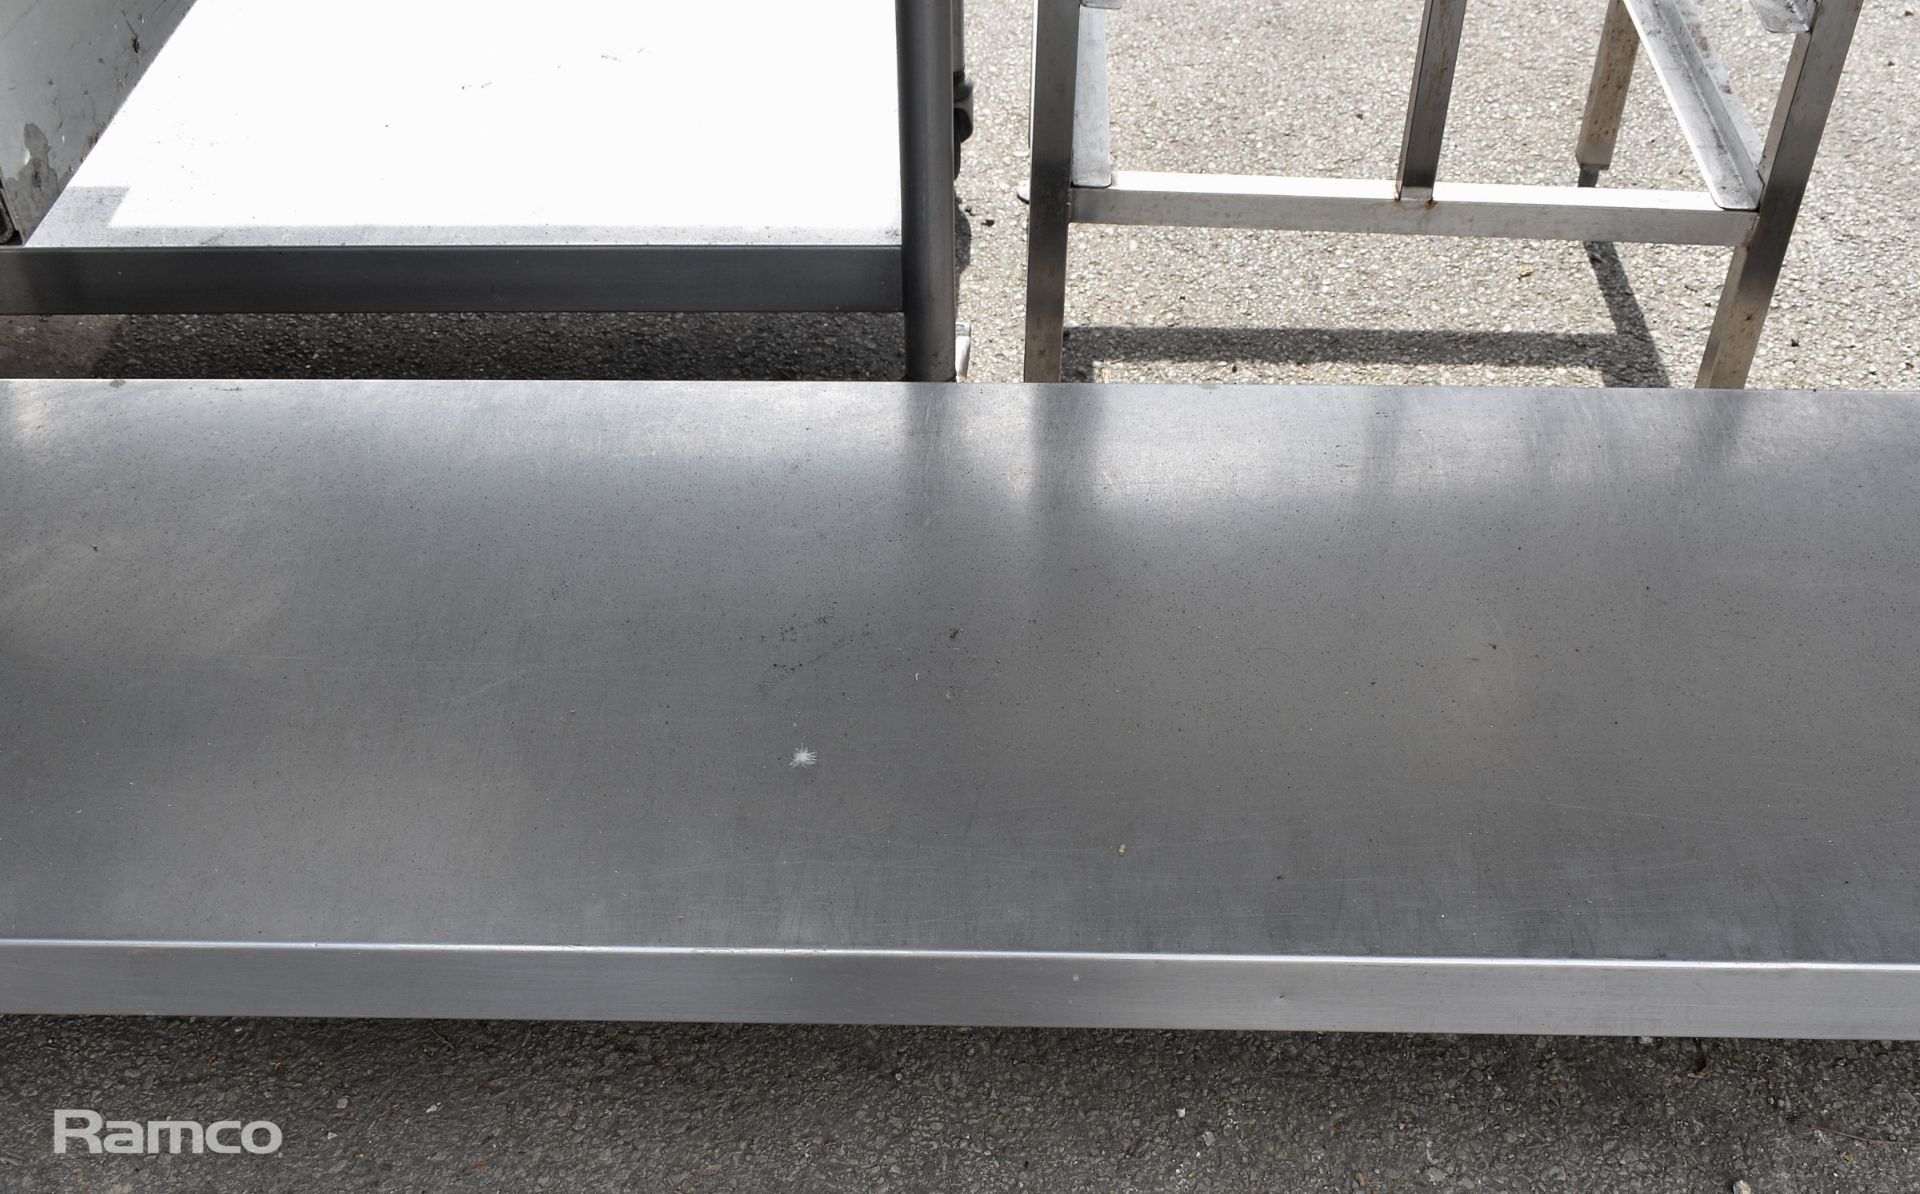 Stainless steel table on castors - W 1800 x D 700 x H 880mm - Image 2 of 3